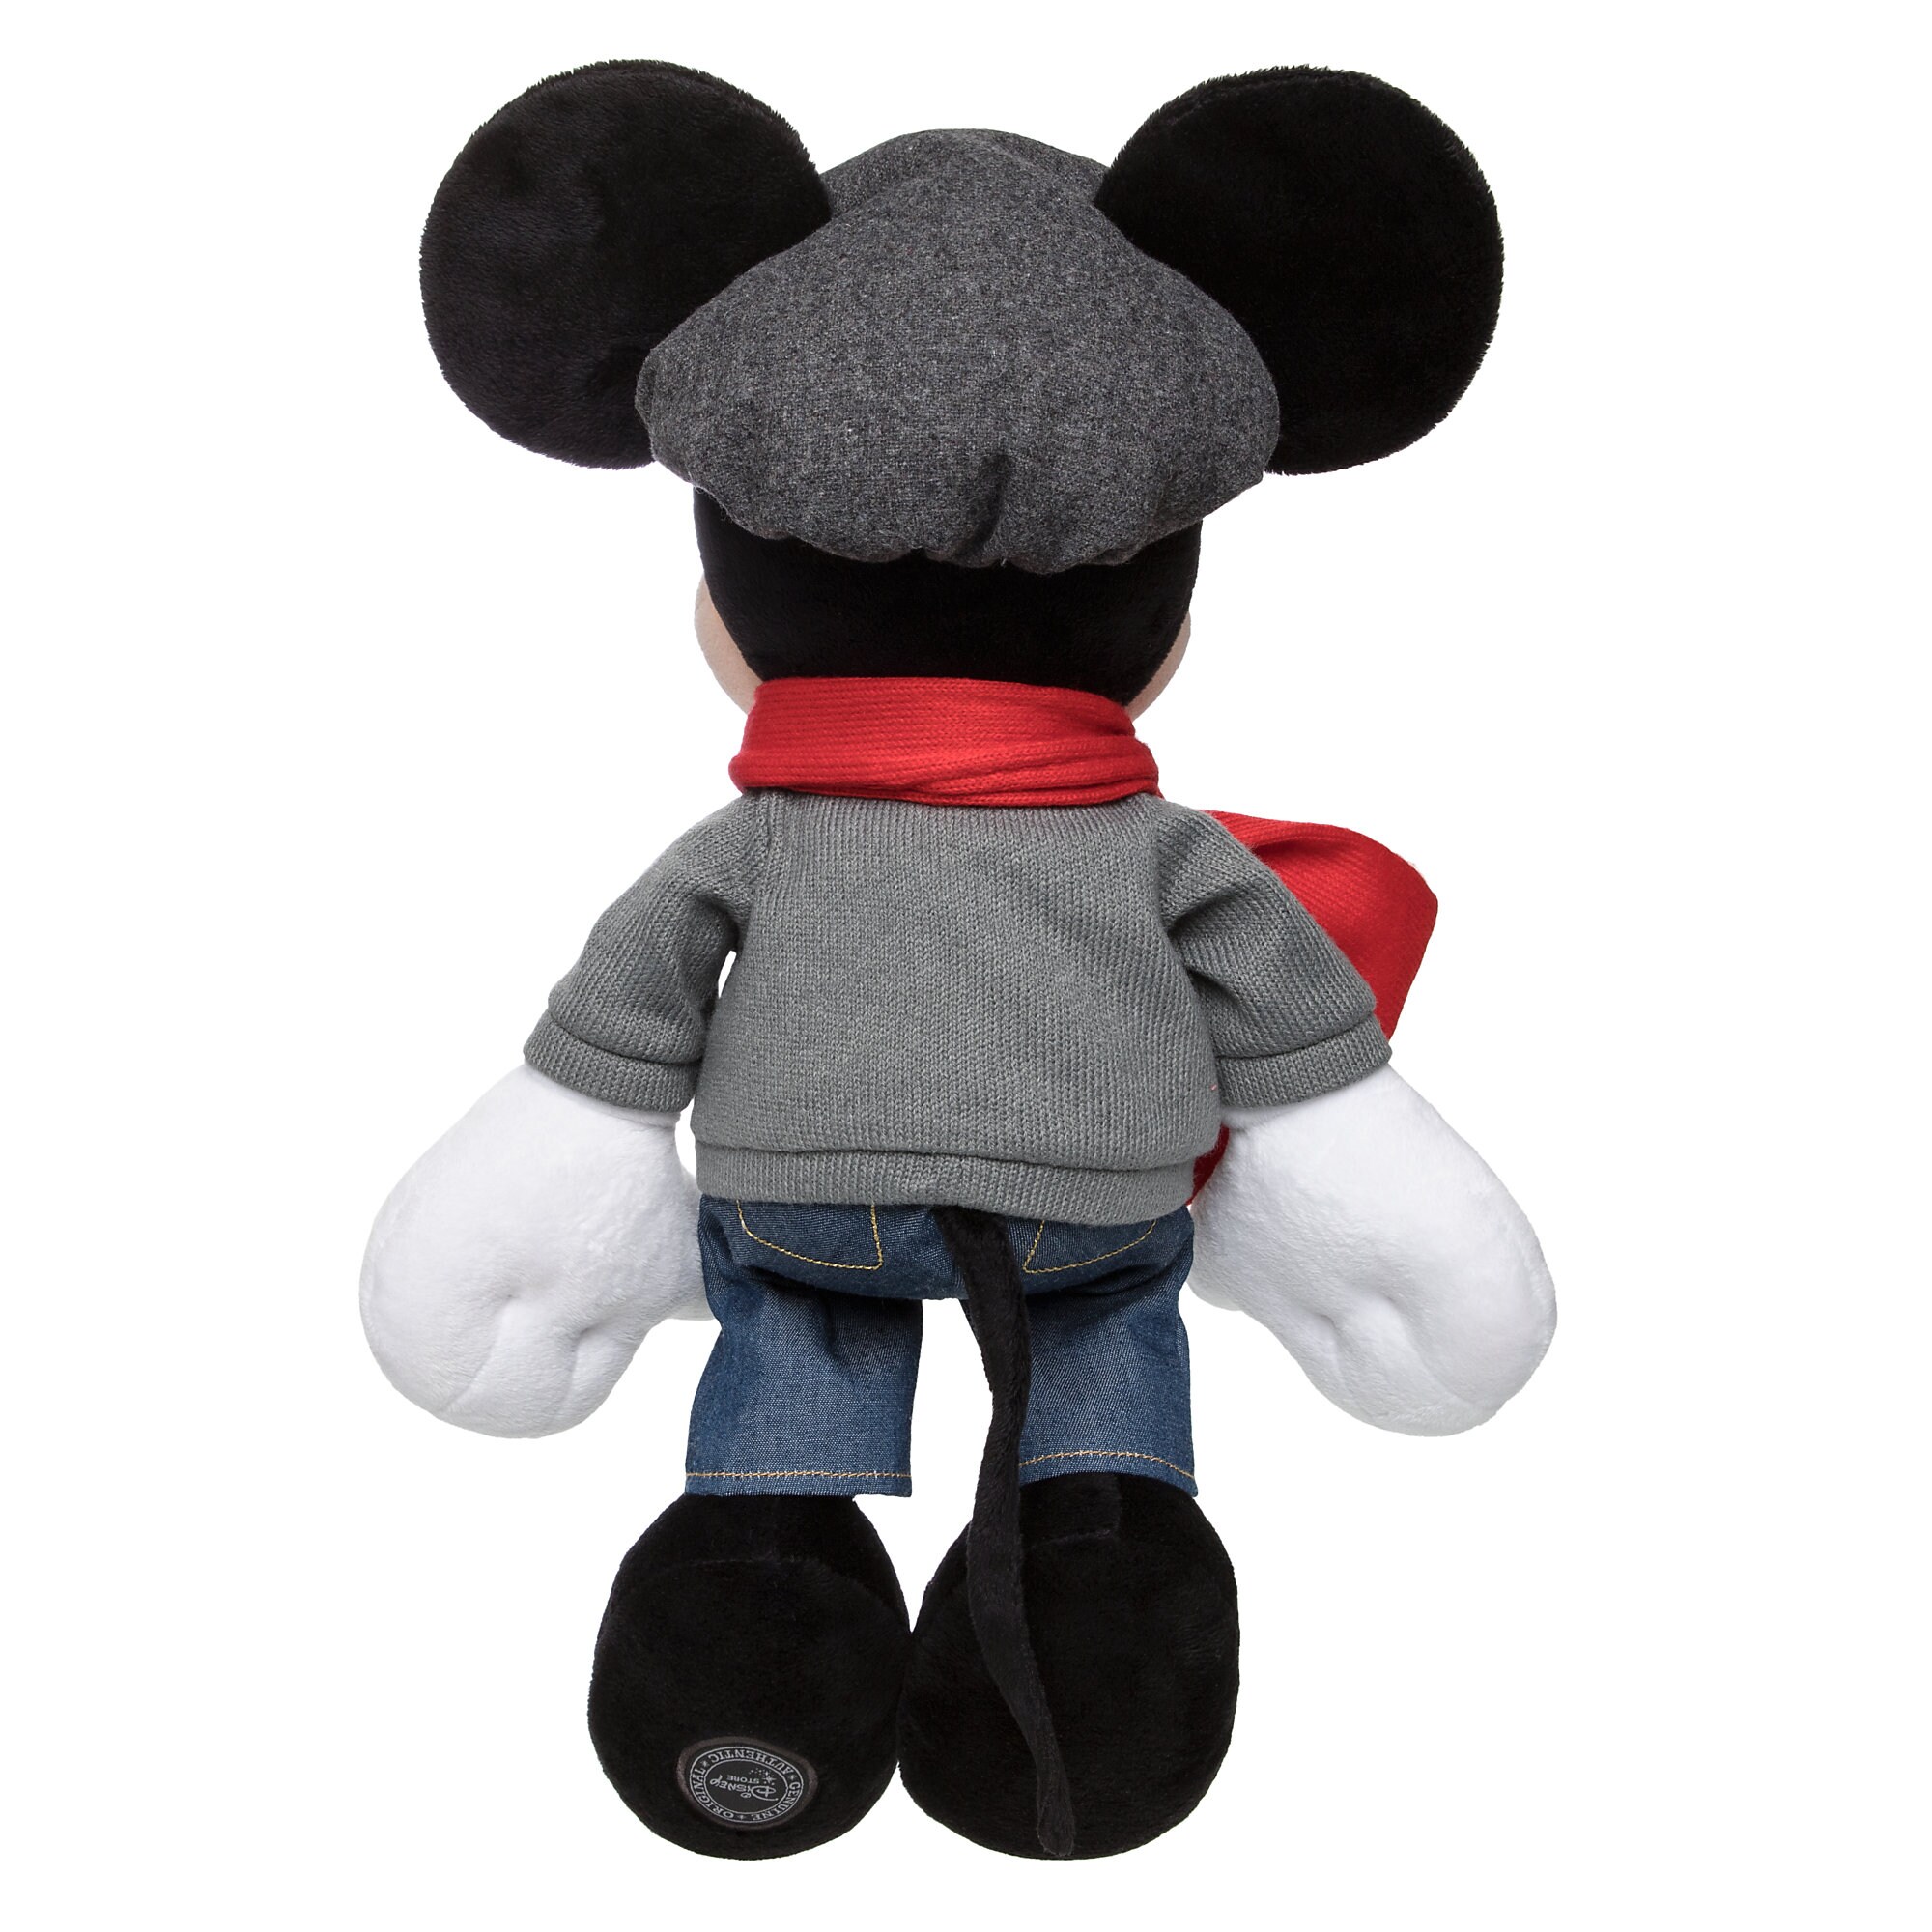 Mickey Mouse Plush - Chicago - 11 1/2''